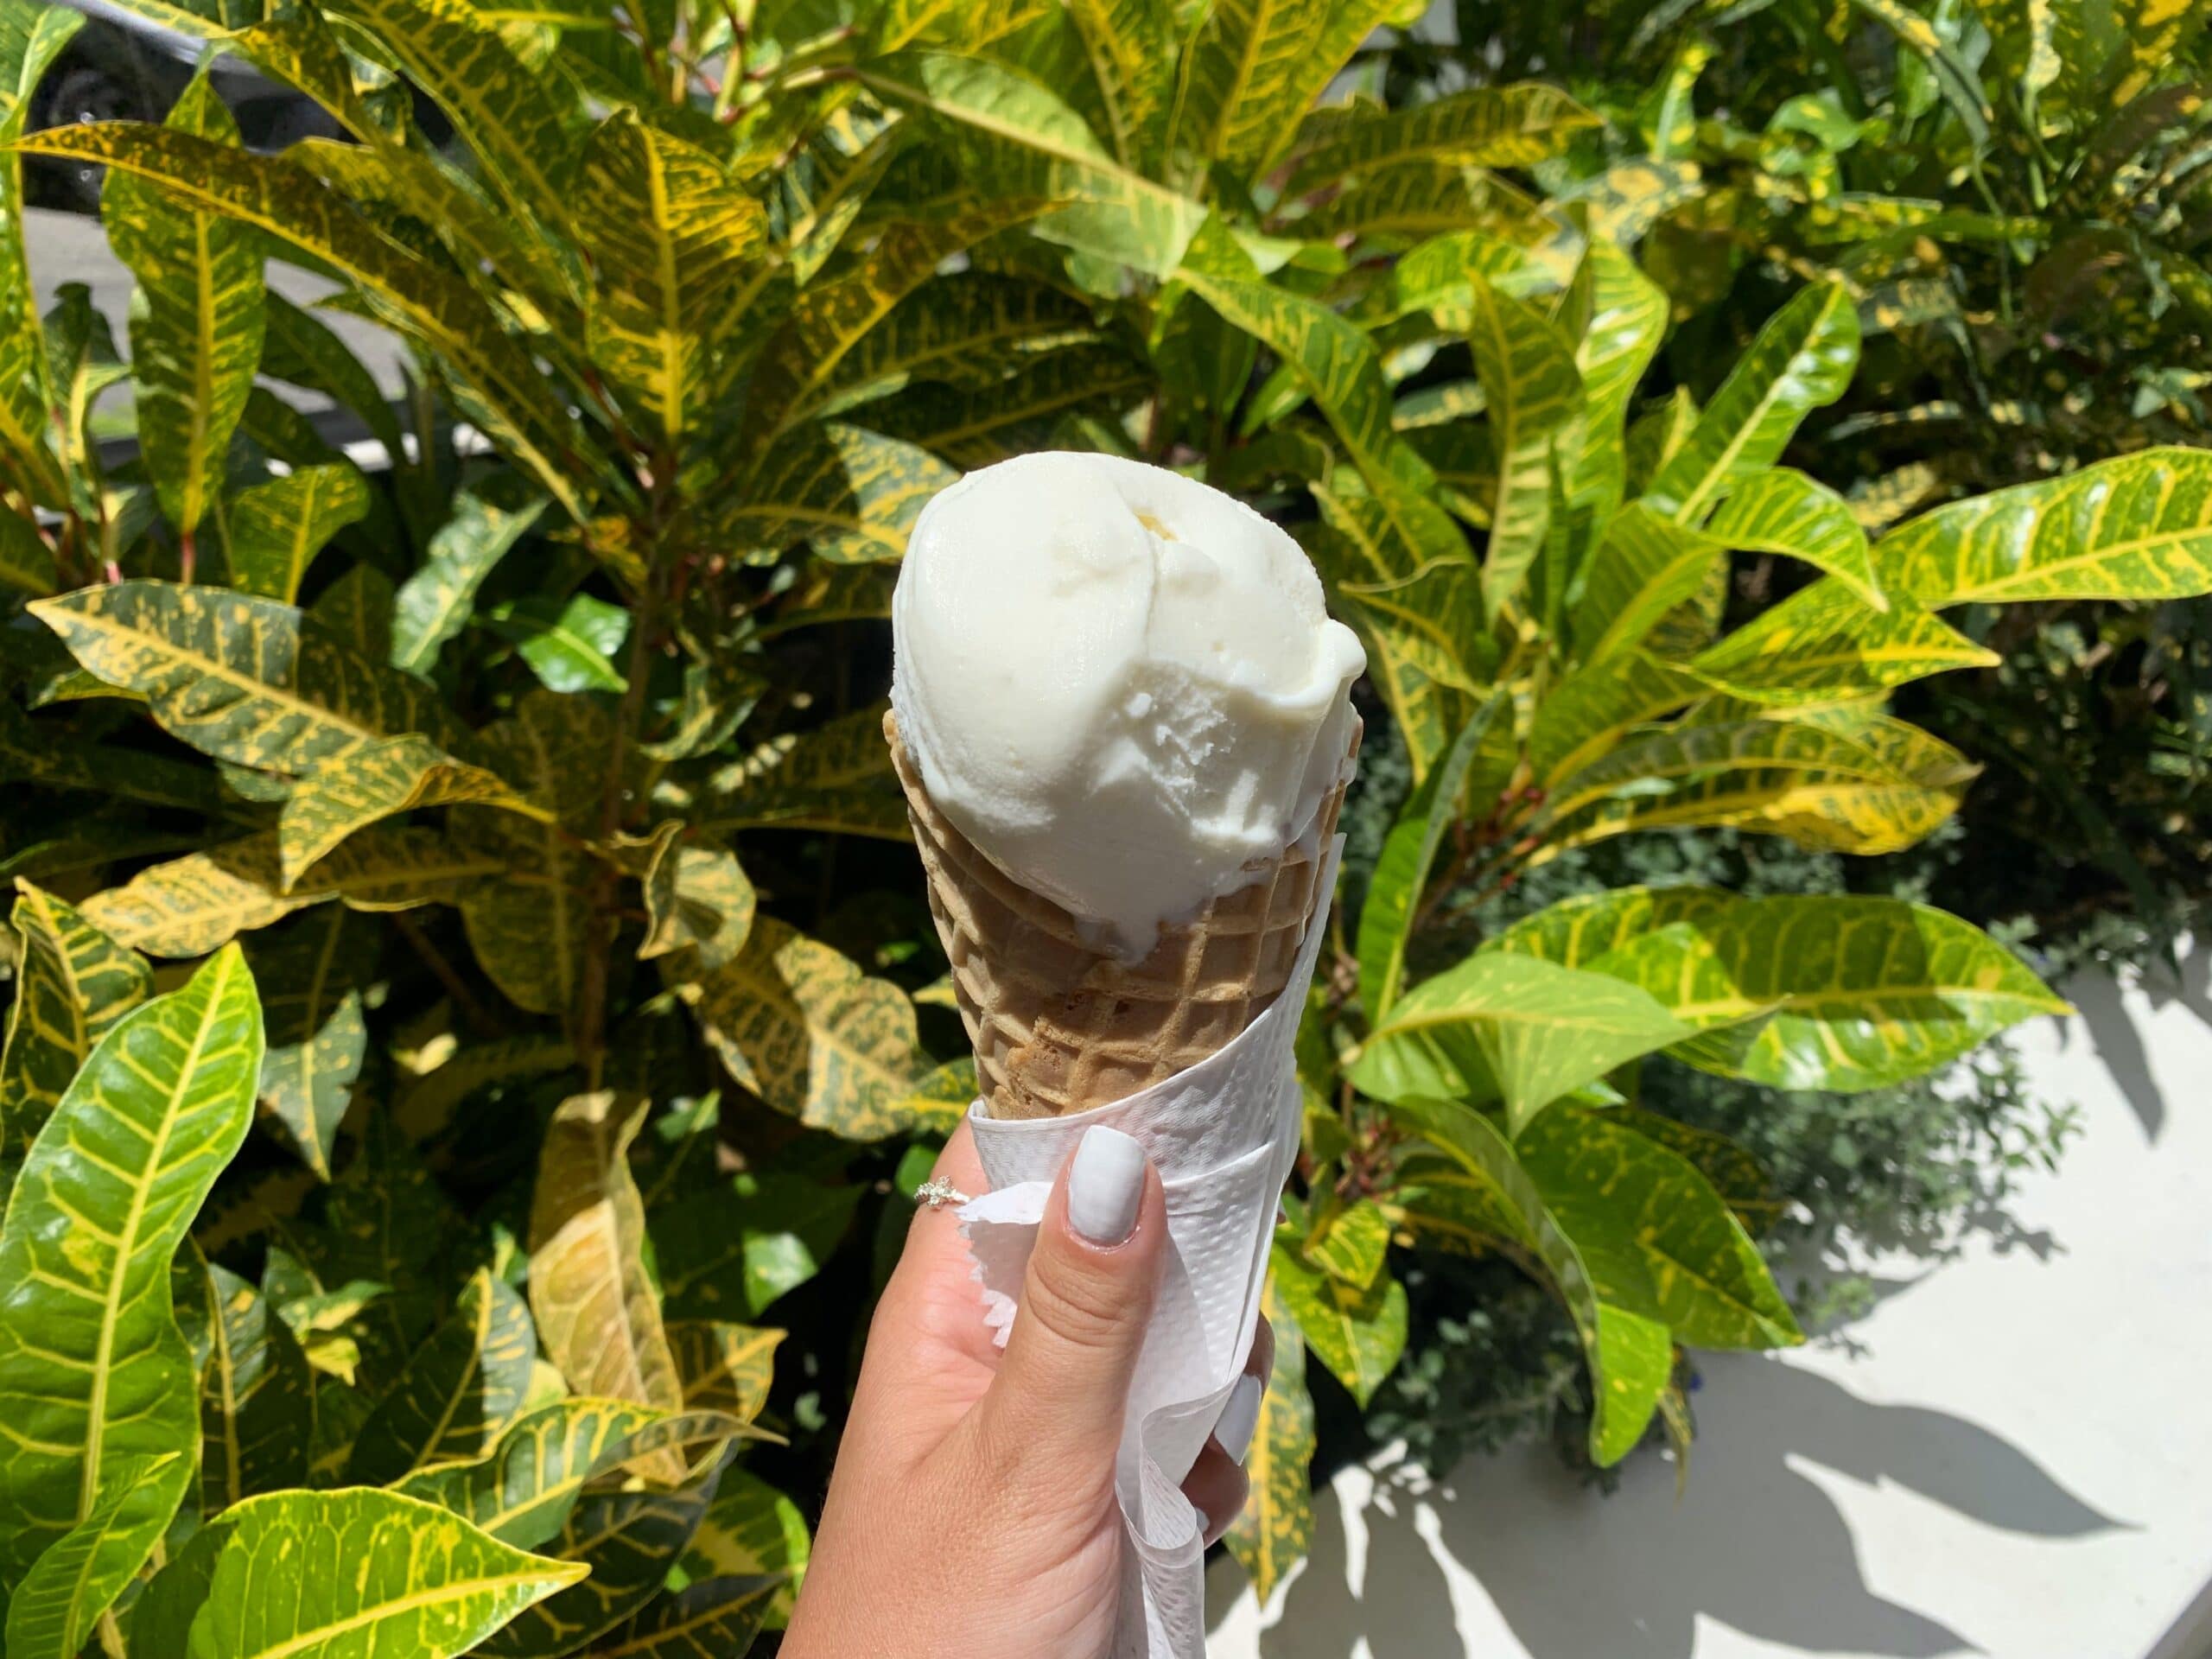 Celebrate National Ice Cream Month and Day on the Selmon Greenway pic